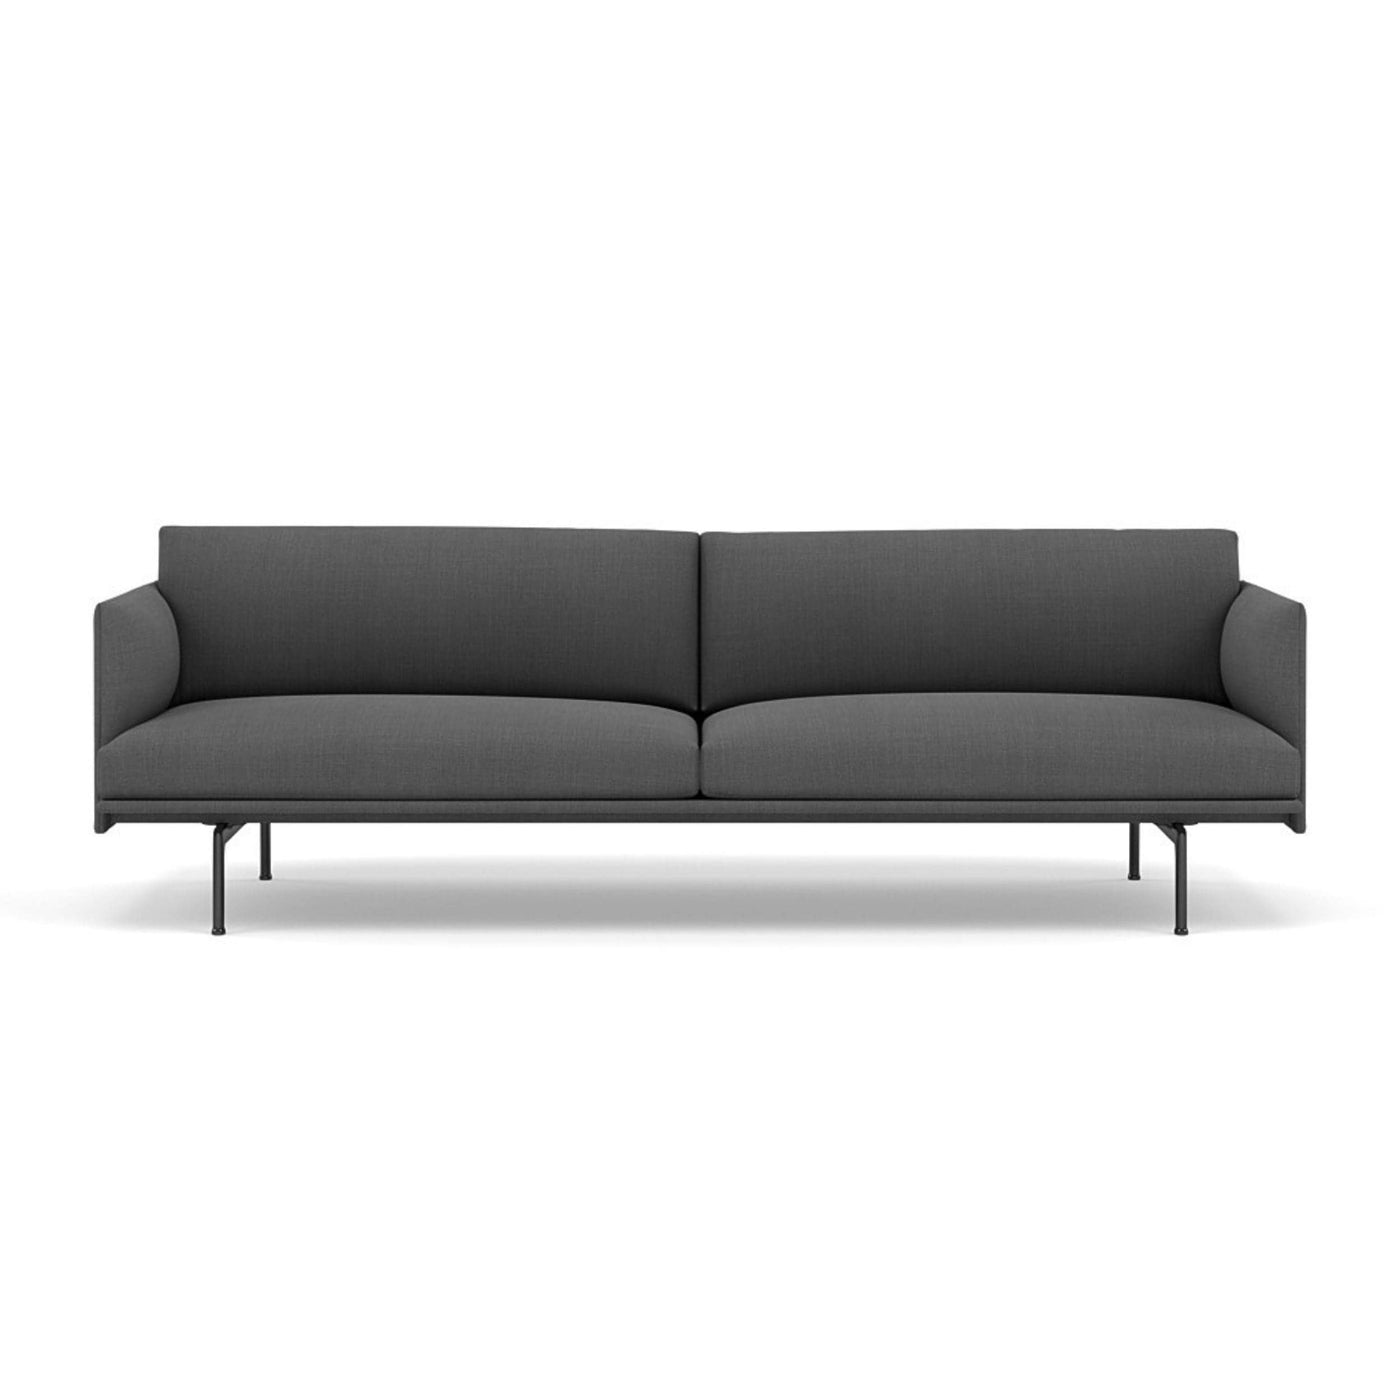 Muuto Outline  Studio Sofa 220 in remix 163 and black legs. Made to order from someday designs.  #colour_remix-163